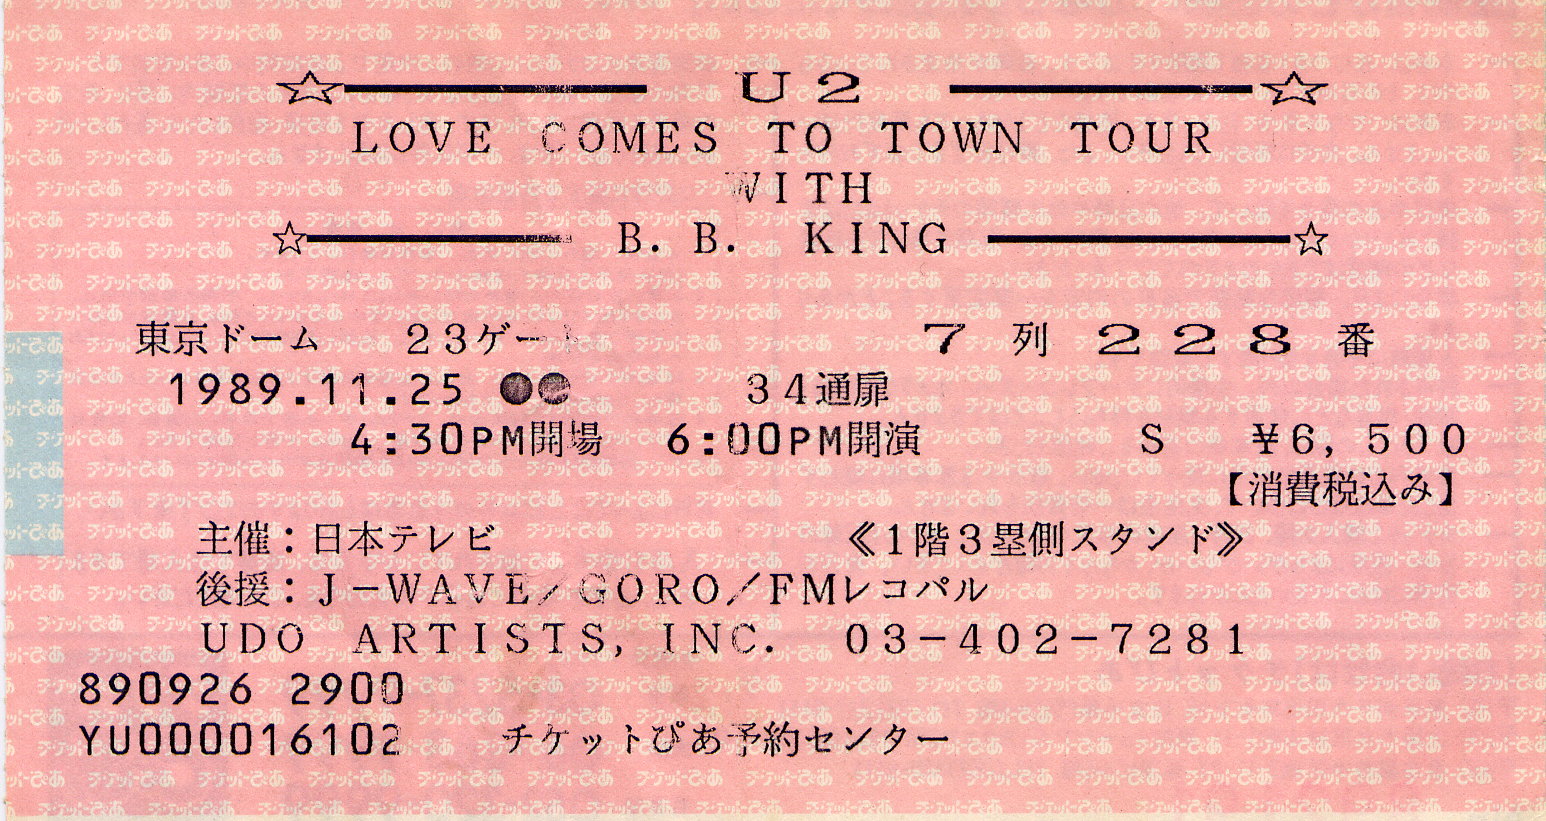 tQ@Love comes to town tour with B. B. King